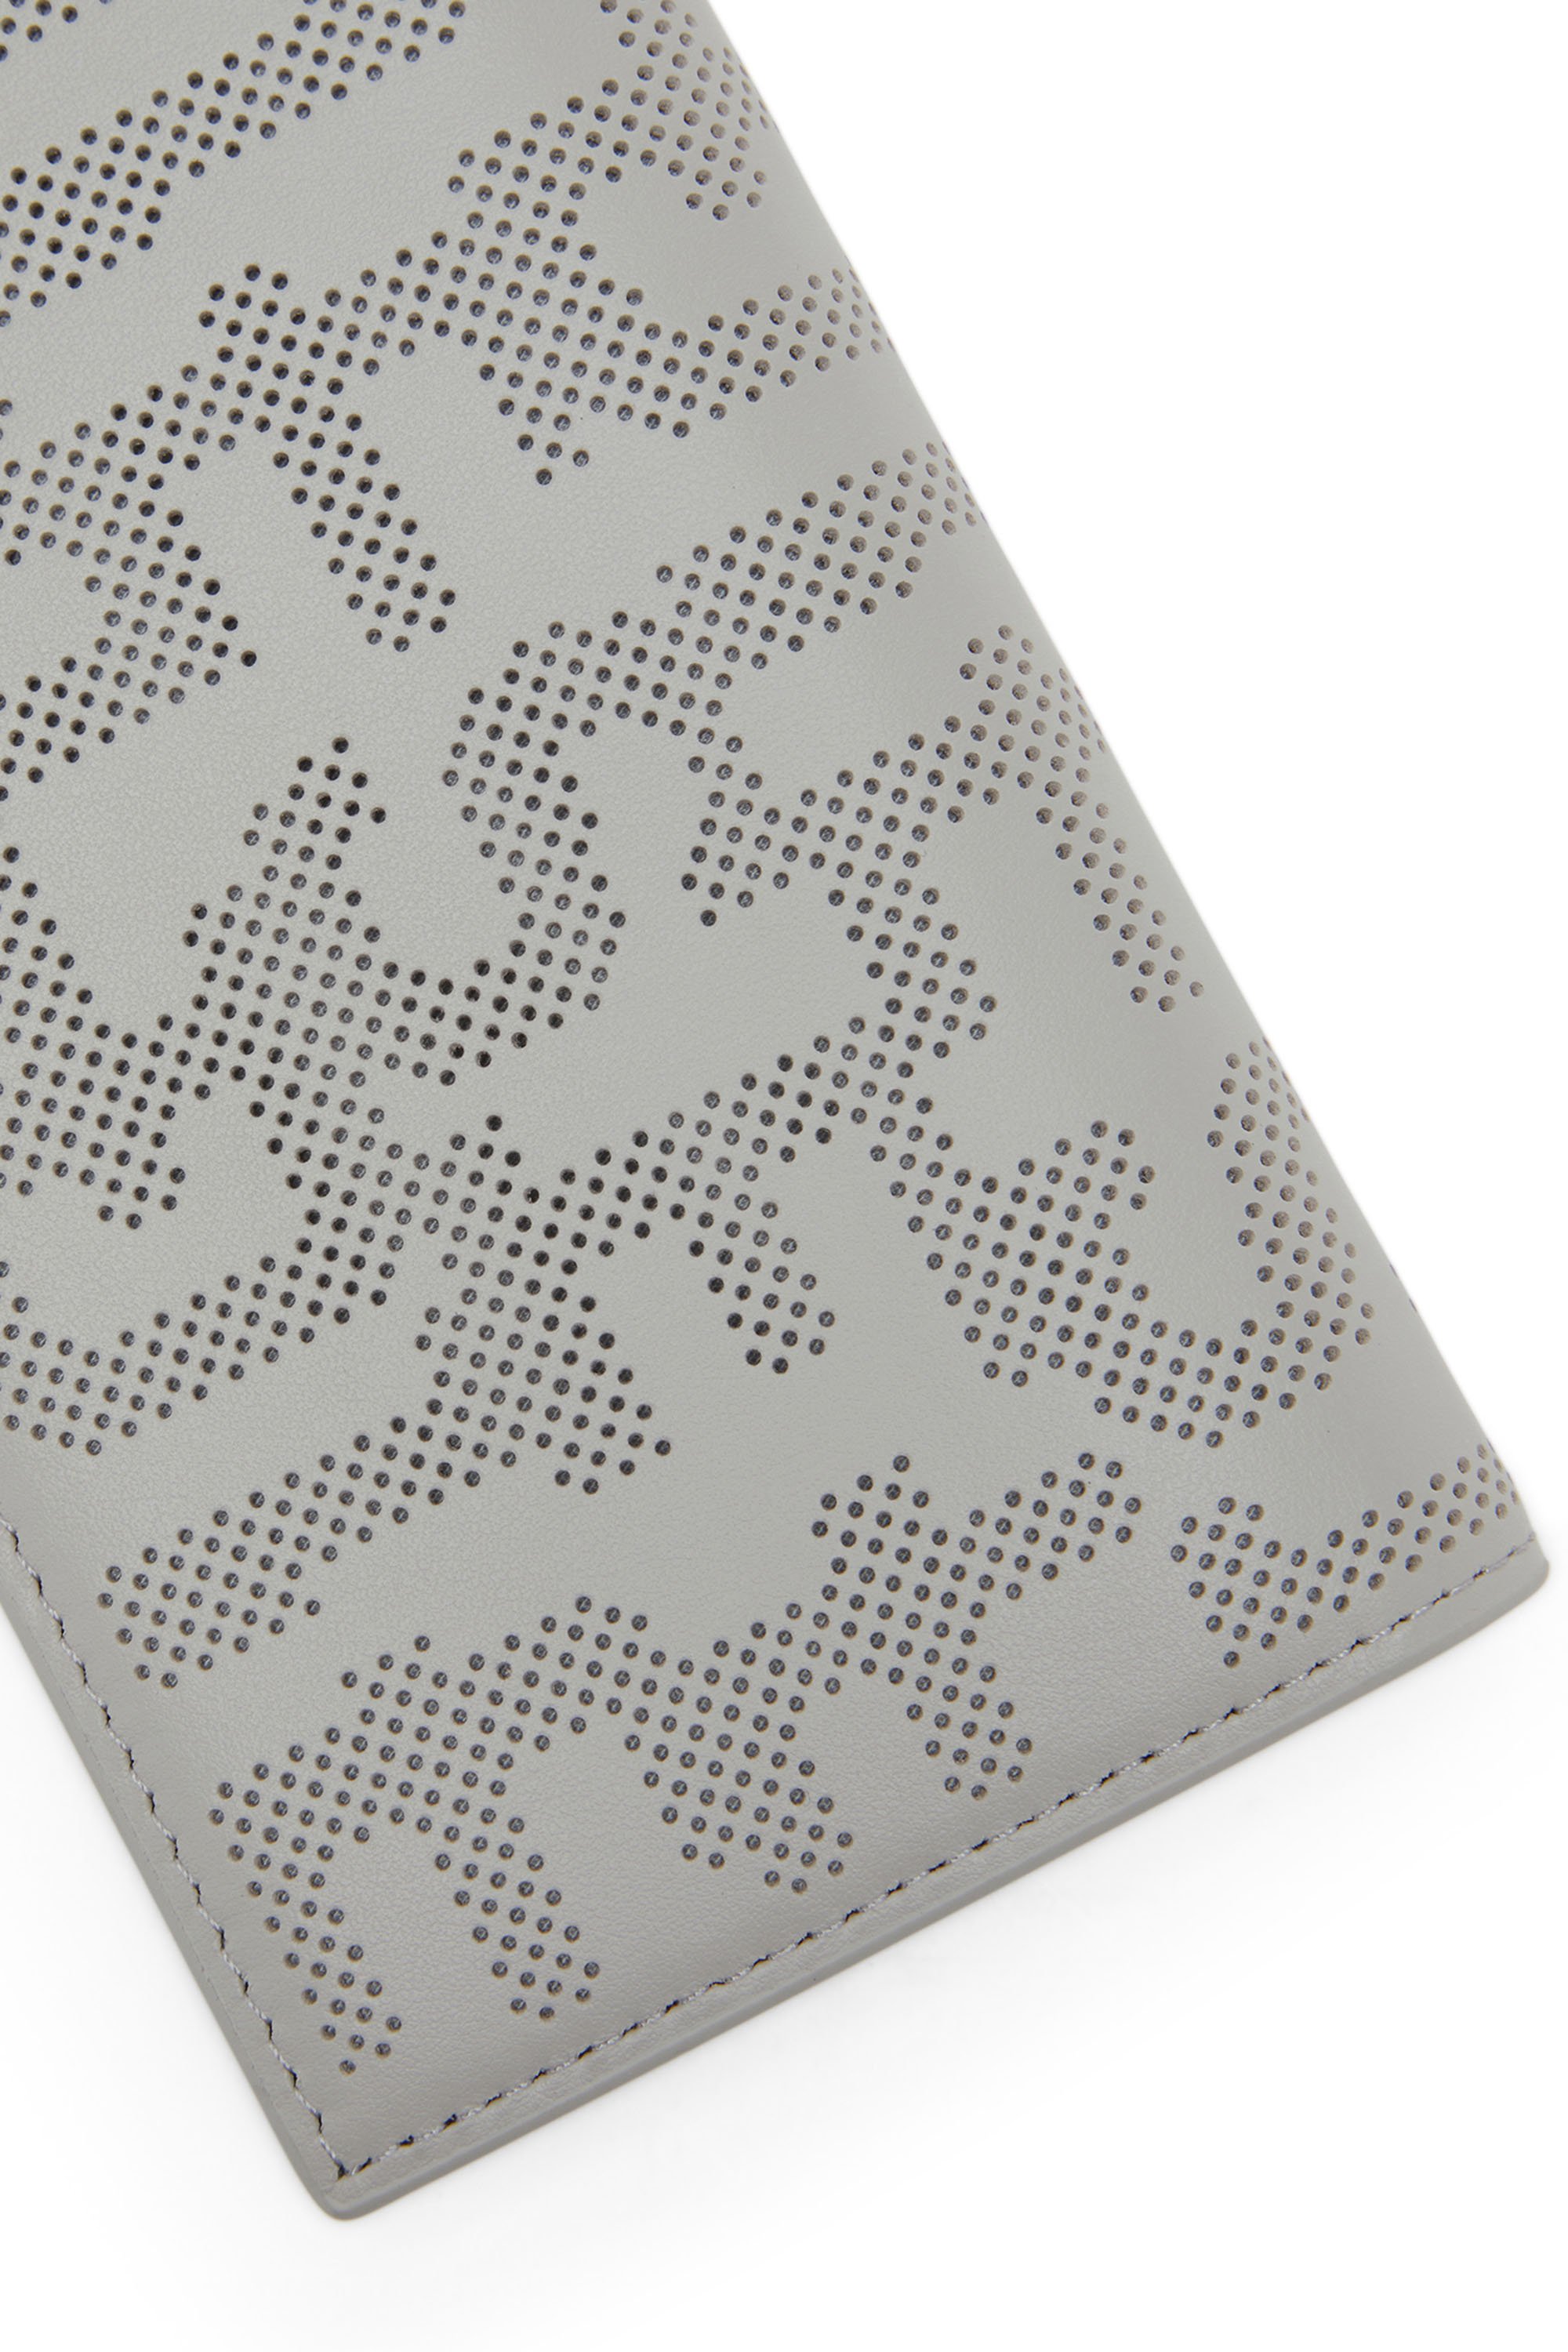 Diesel - CONTINENTAL ZIP DETACHABLE COIN CASE, Unisex Continental wallet in logo-perforated leather in Grey - Image 4